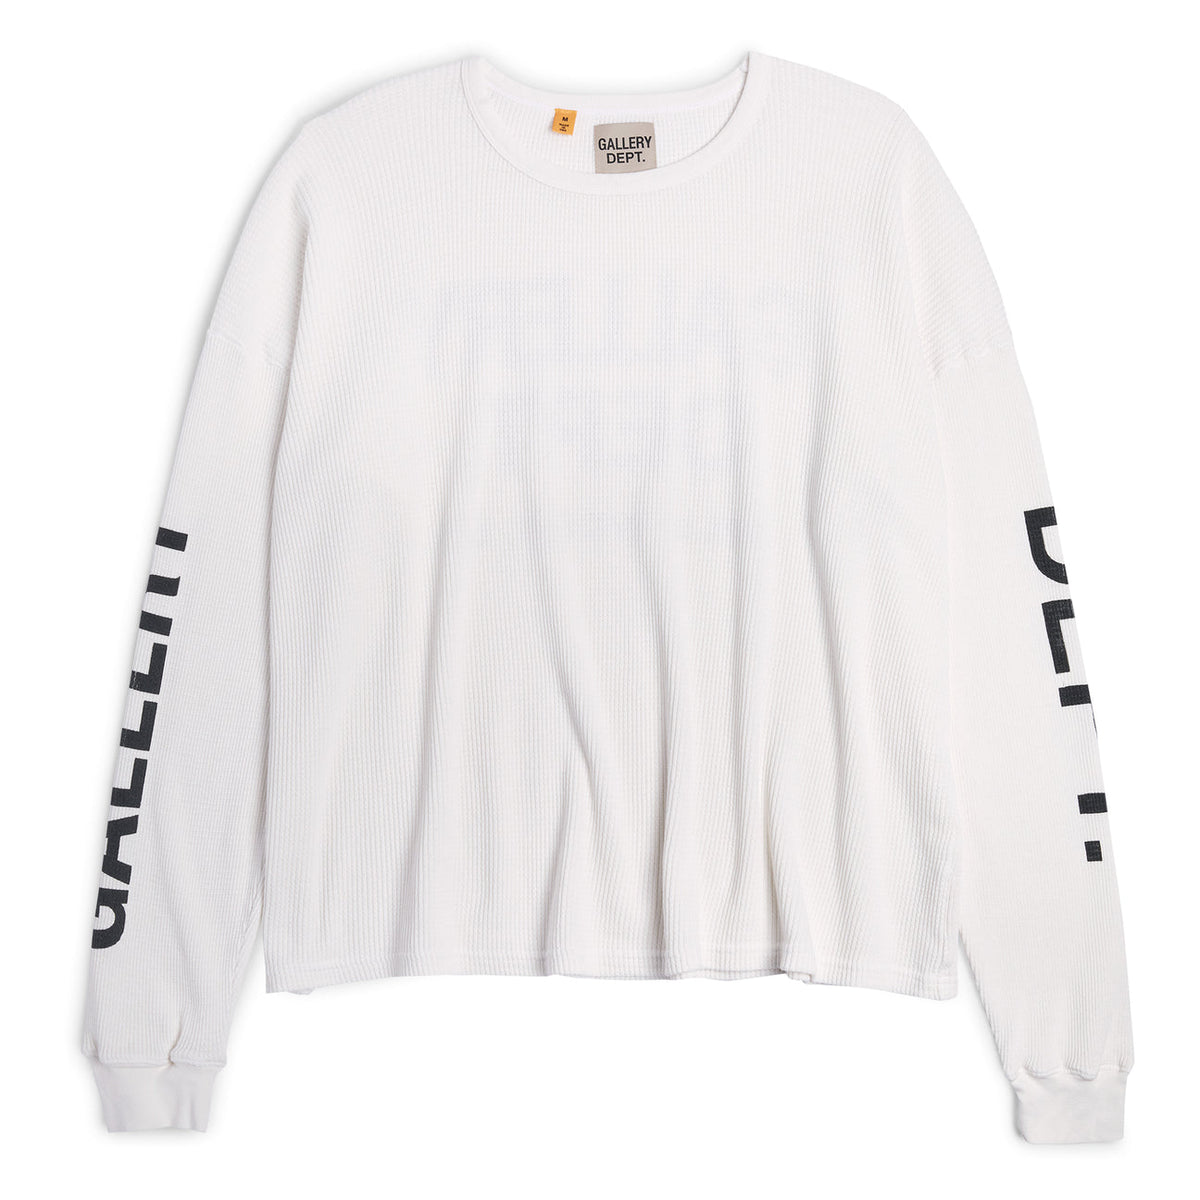 Gallery Dept. Thermal L/S White